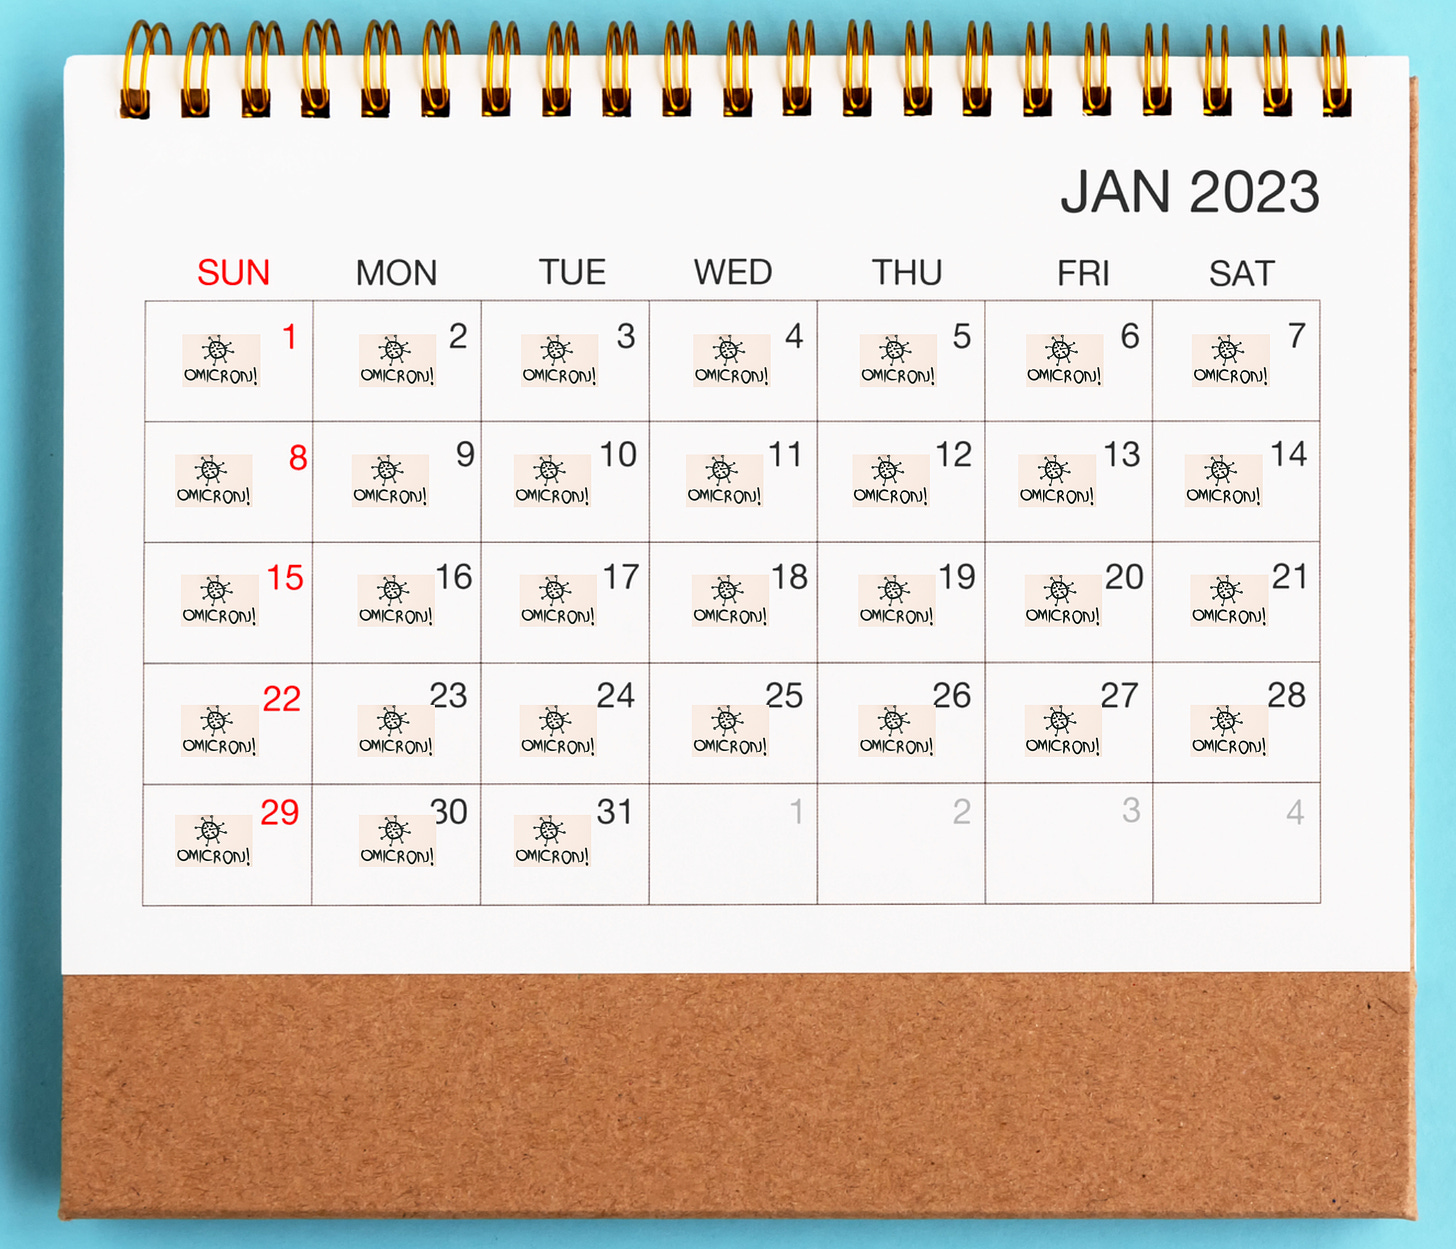 a calender with omicron every day